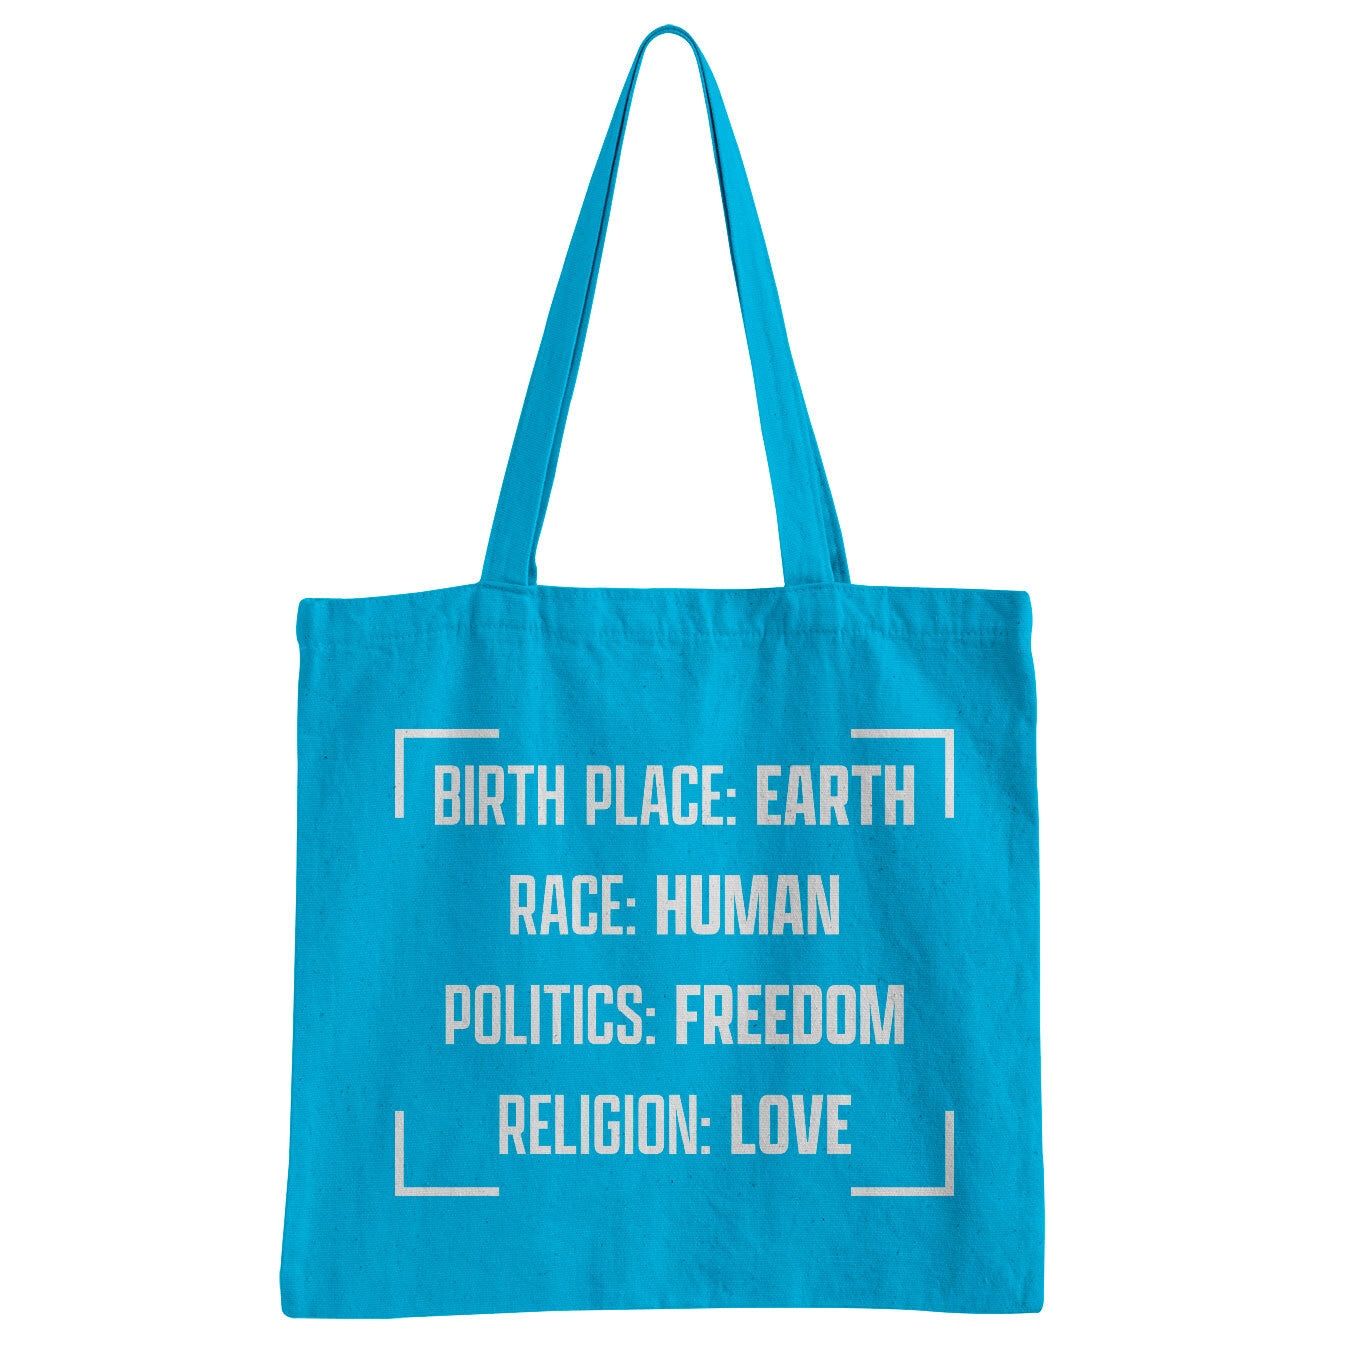 Birthplace - Earth Tote Bag (blå)